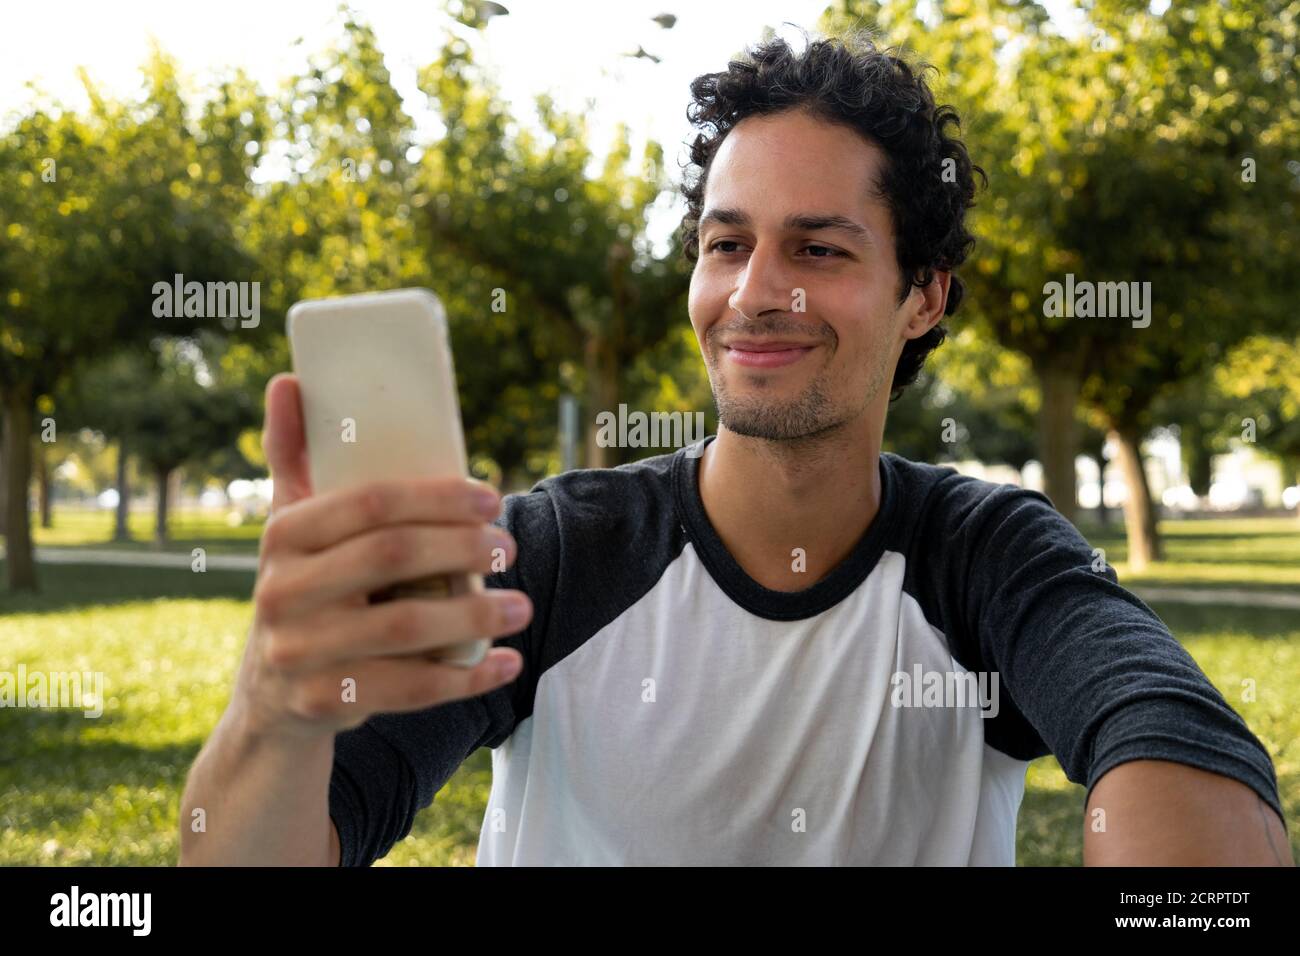 Portrait of young man using the mobile phone in the park Stock Photo